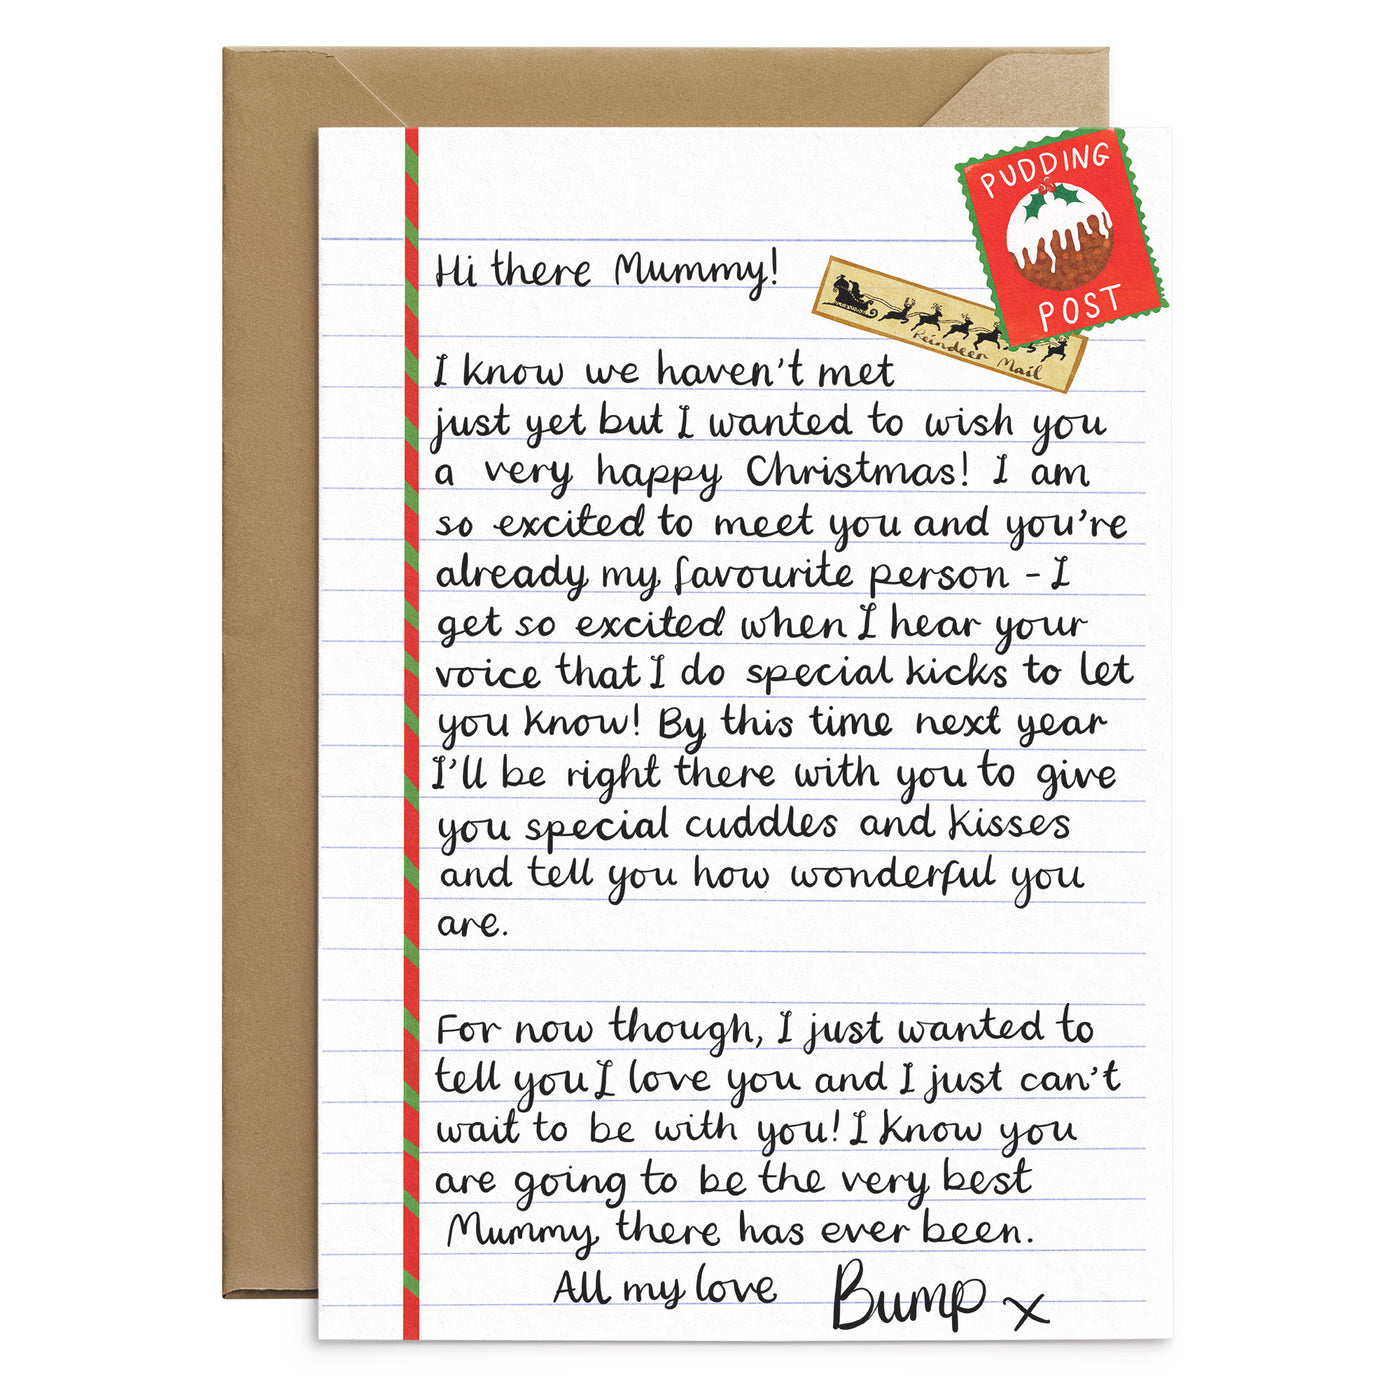 To Mum From Bump Christmas Card - Poppins & Co.